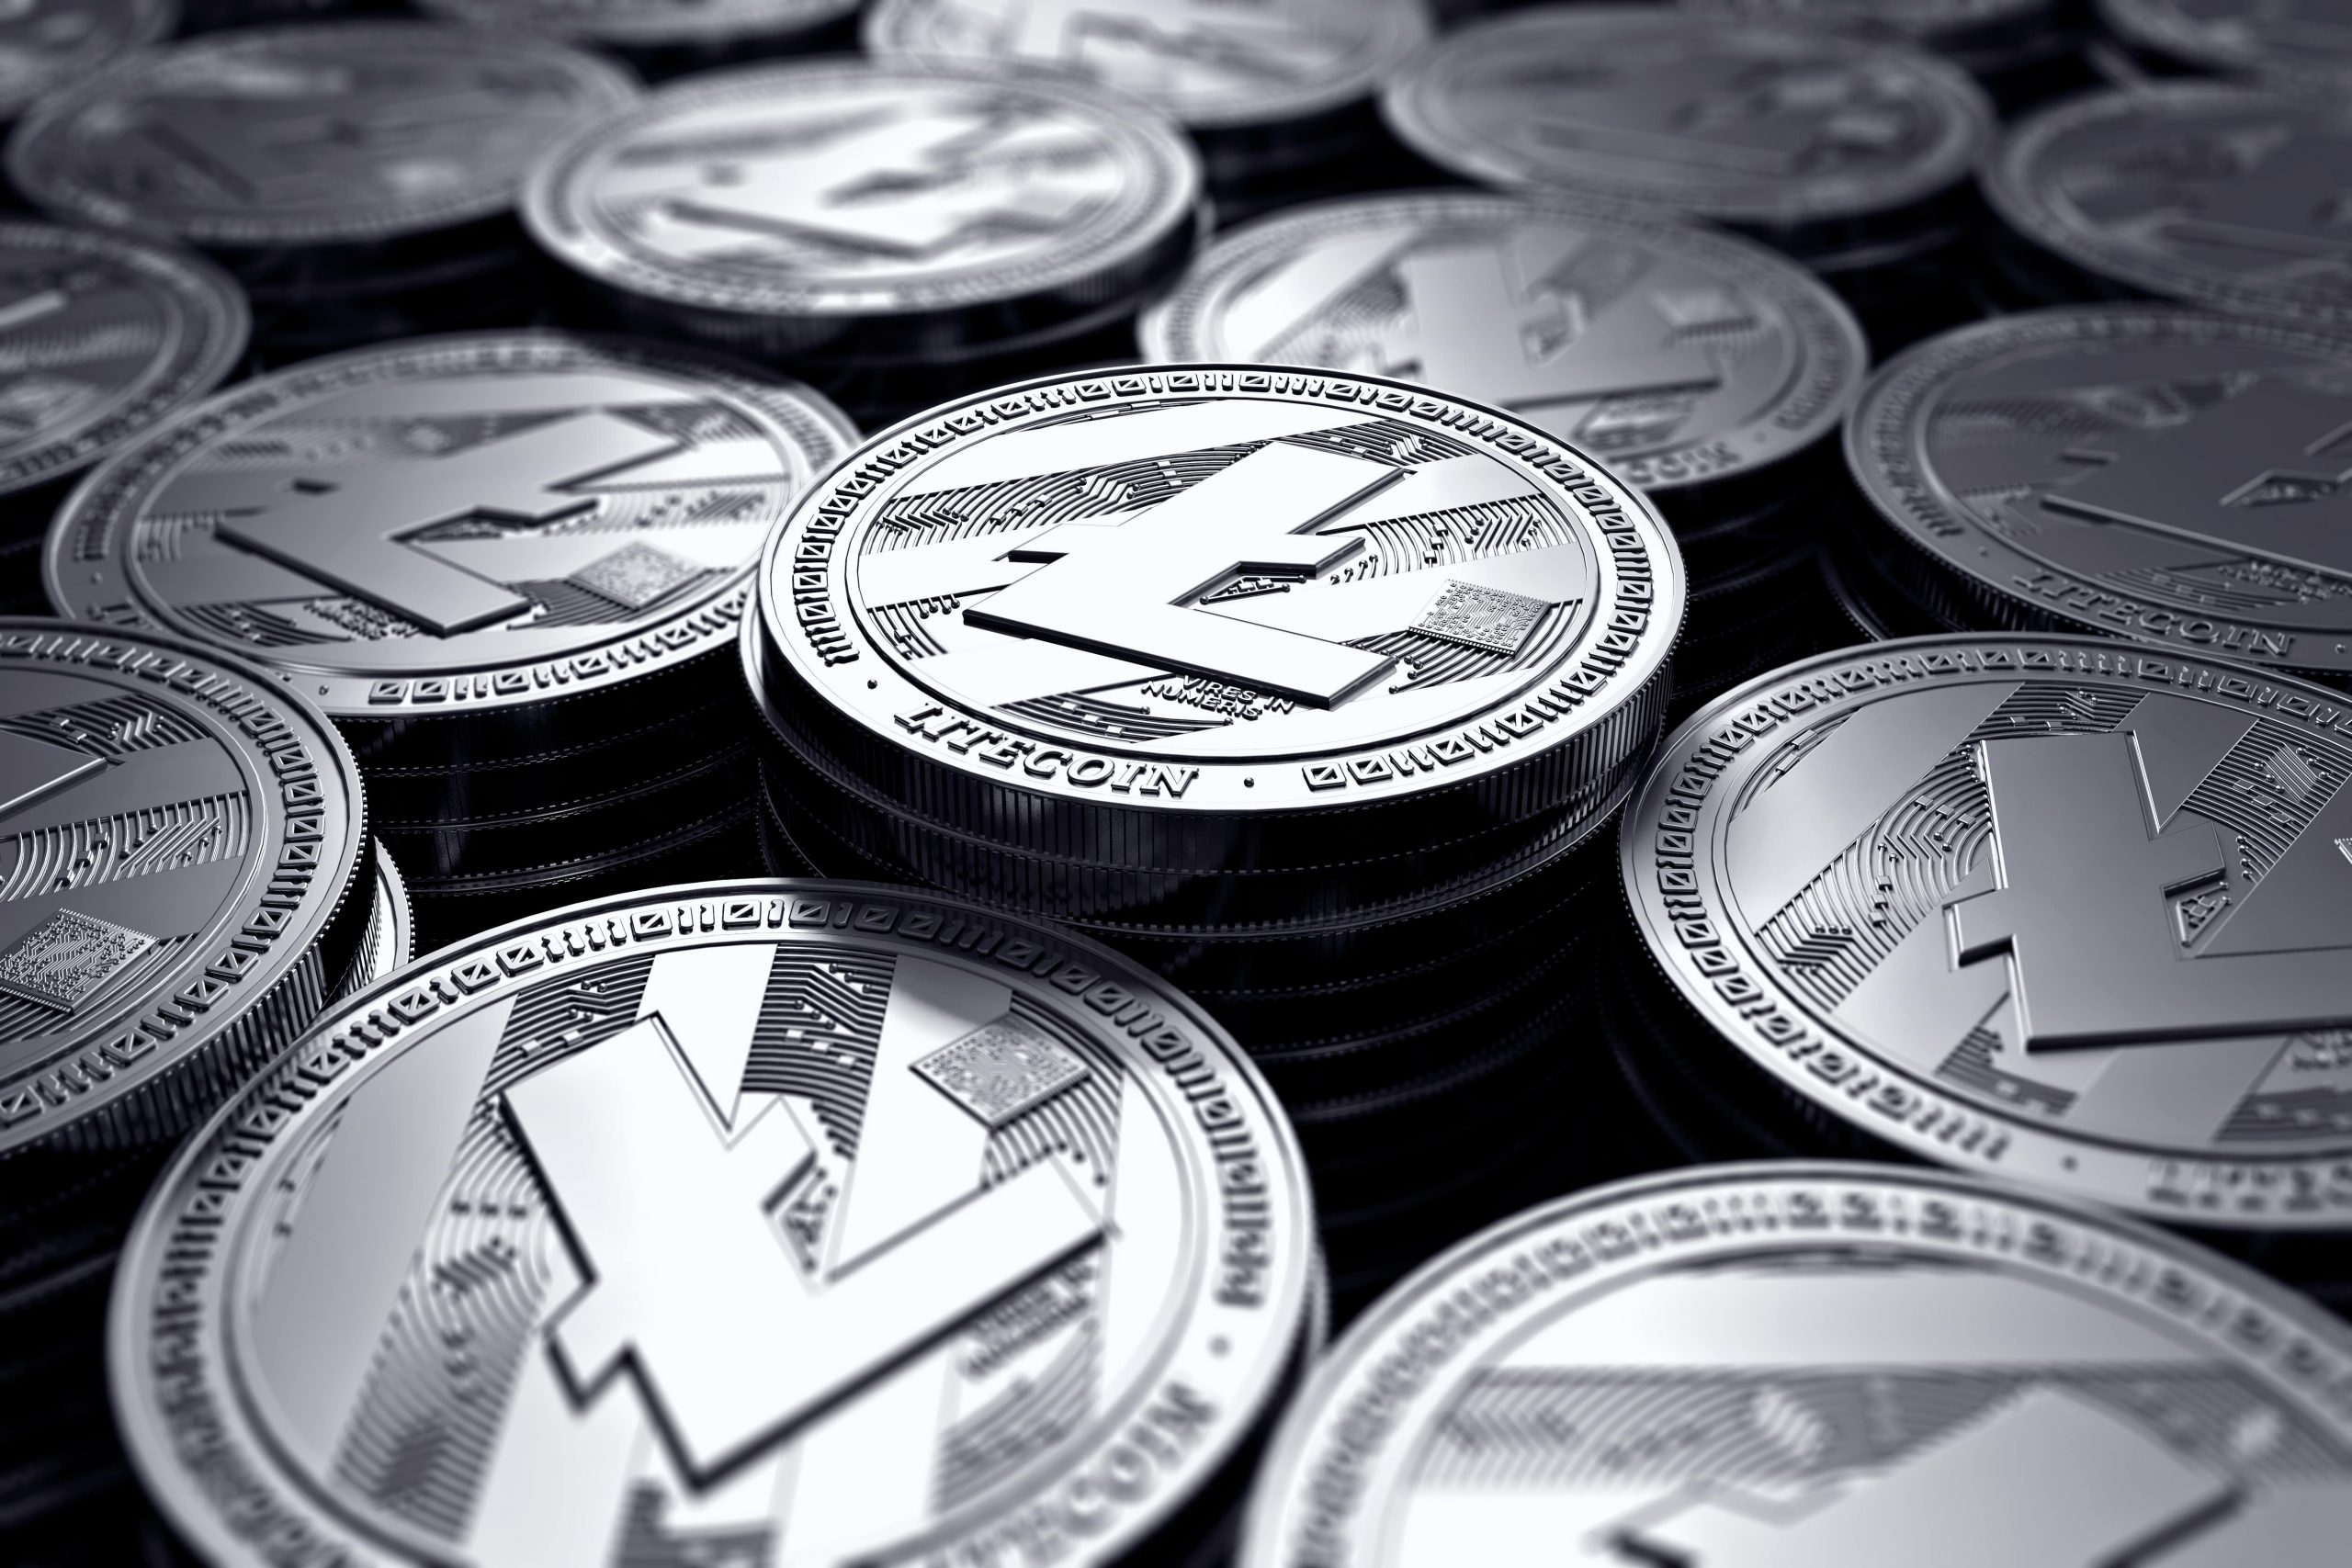 Litecoin Gains Momentum Ahead of Halving Event in August